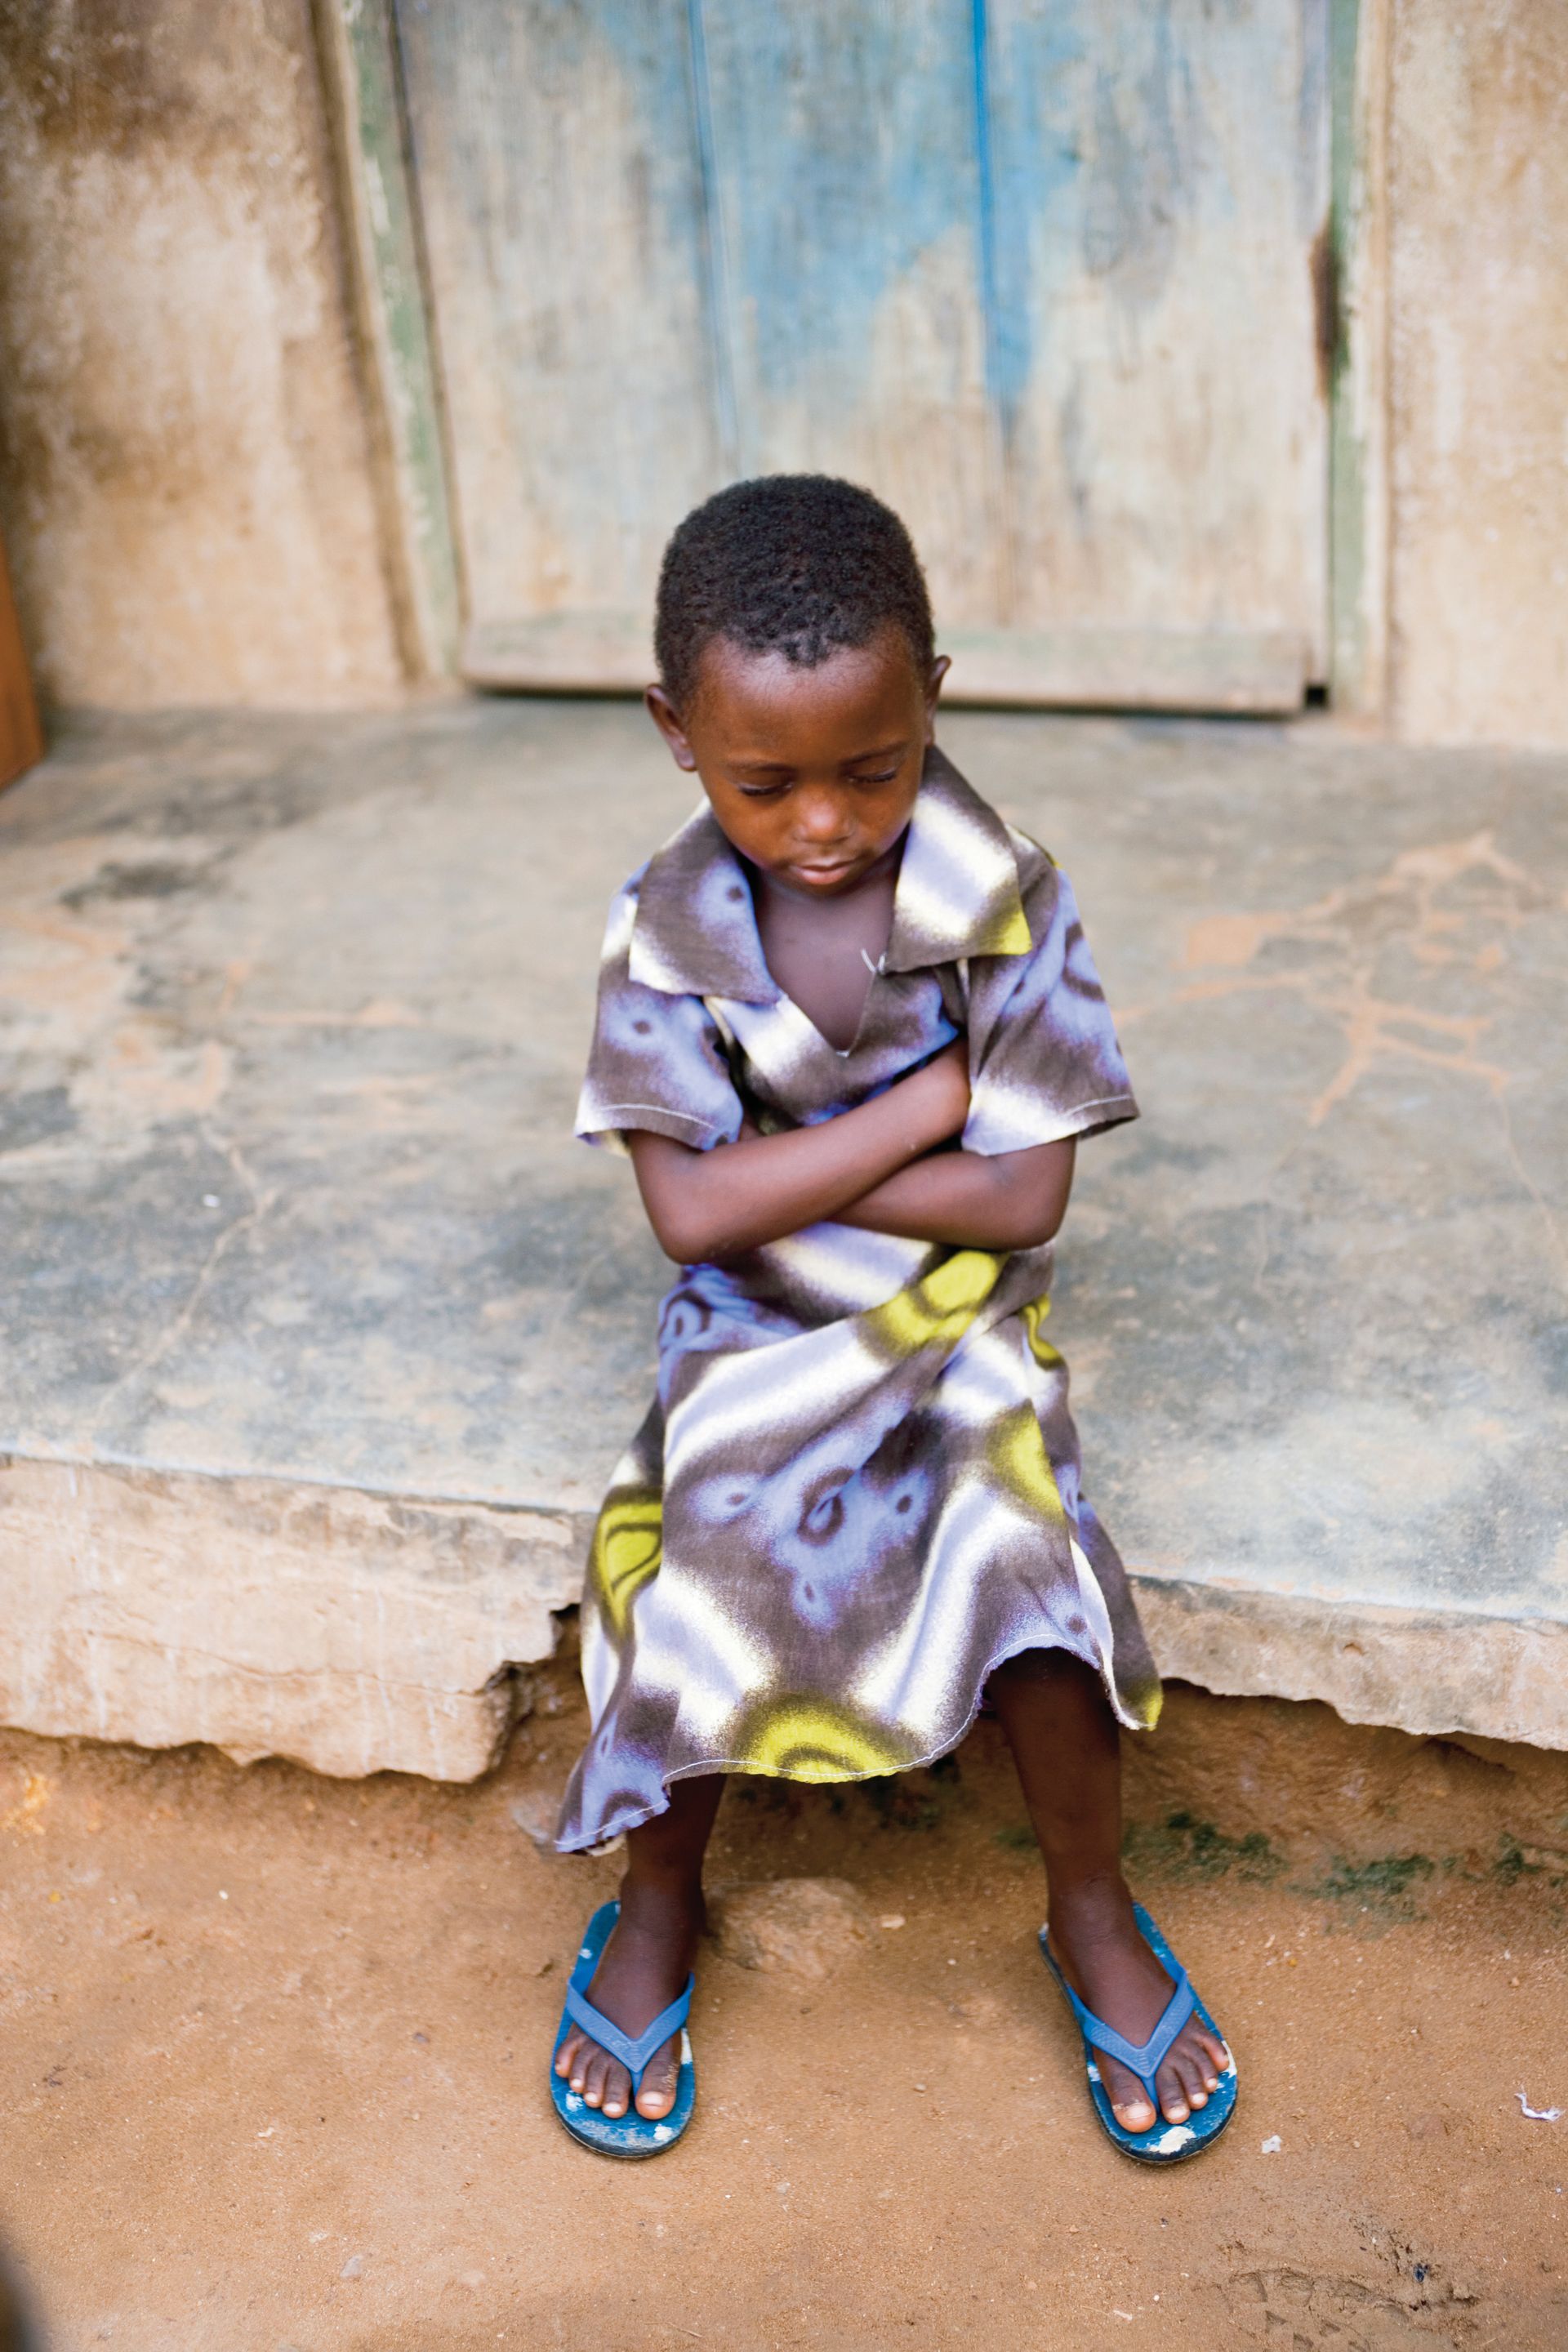 A little girl in Ghana sits on the steps and prays.